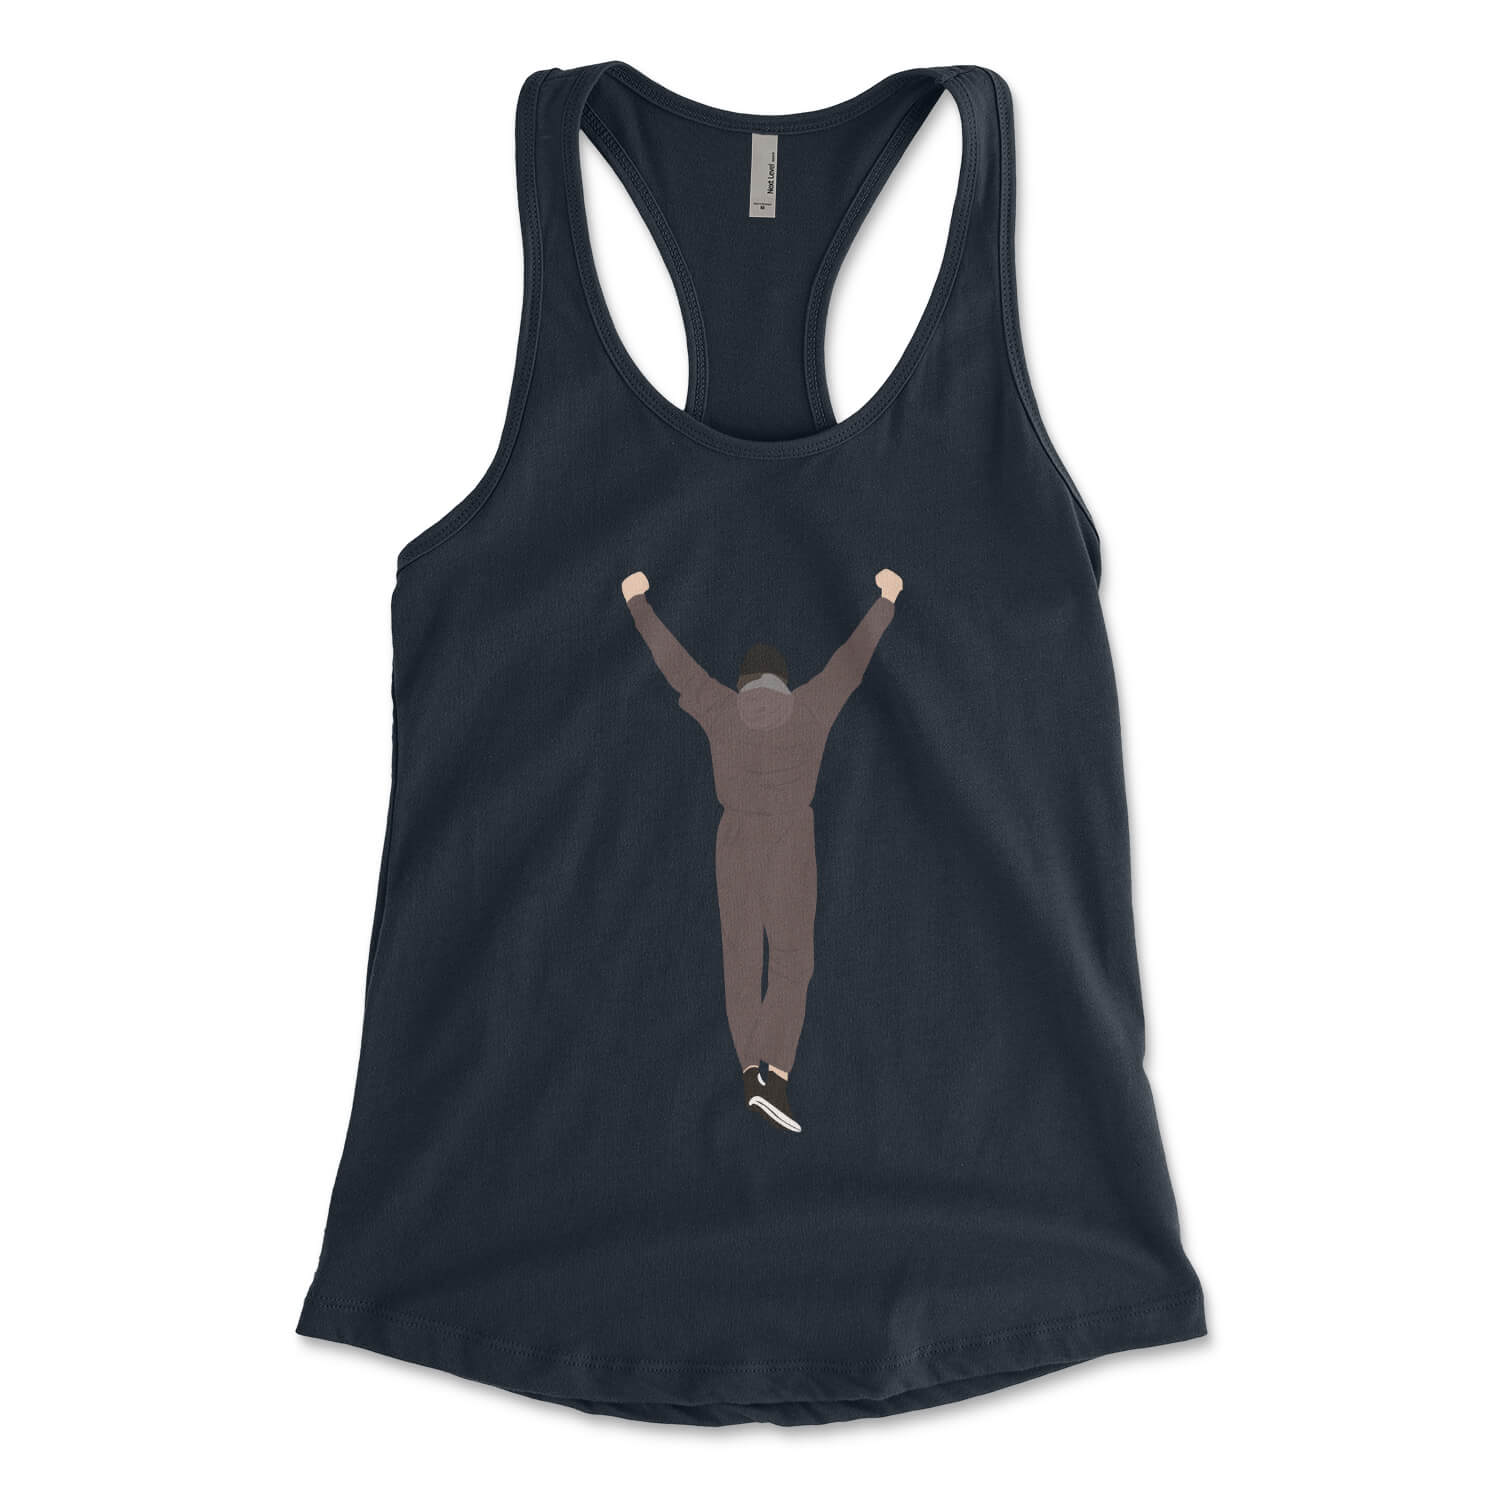 Rocky midnight navy blue womens racerback tank top from Phillygoat